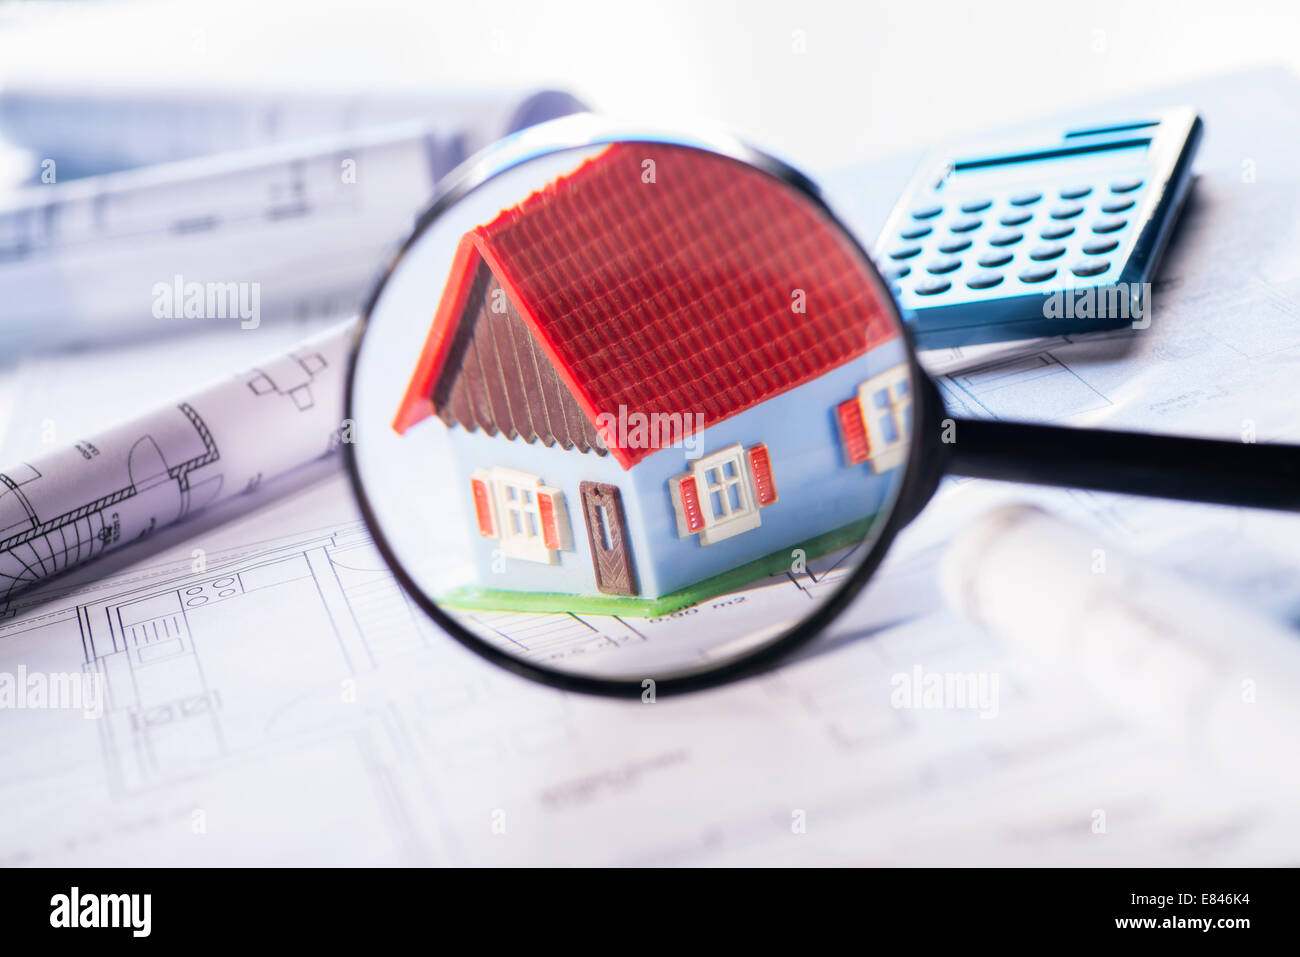 Architectural model is focused with a magnifying glass. In the background, construction plans and a calculator can be seen. Stock Photo